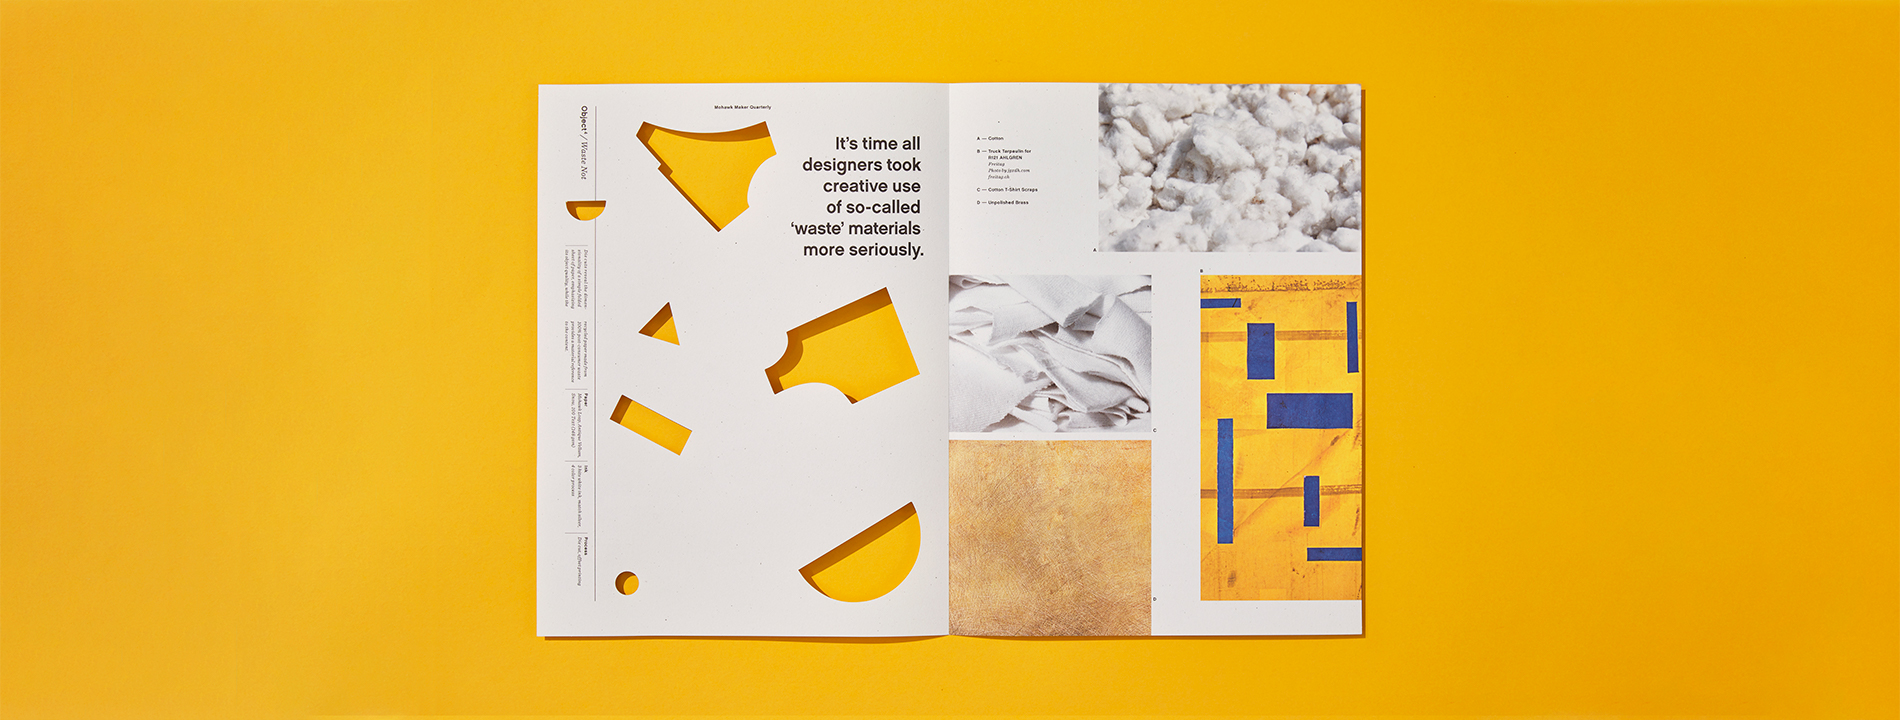 Waste Not maker quarterly article on a yellow backdrop